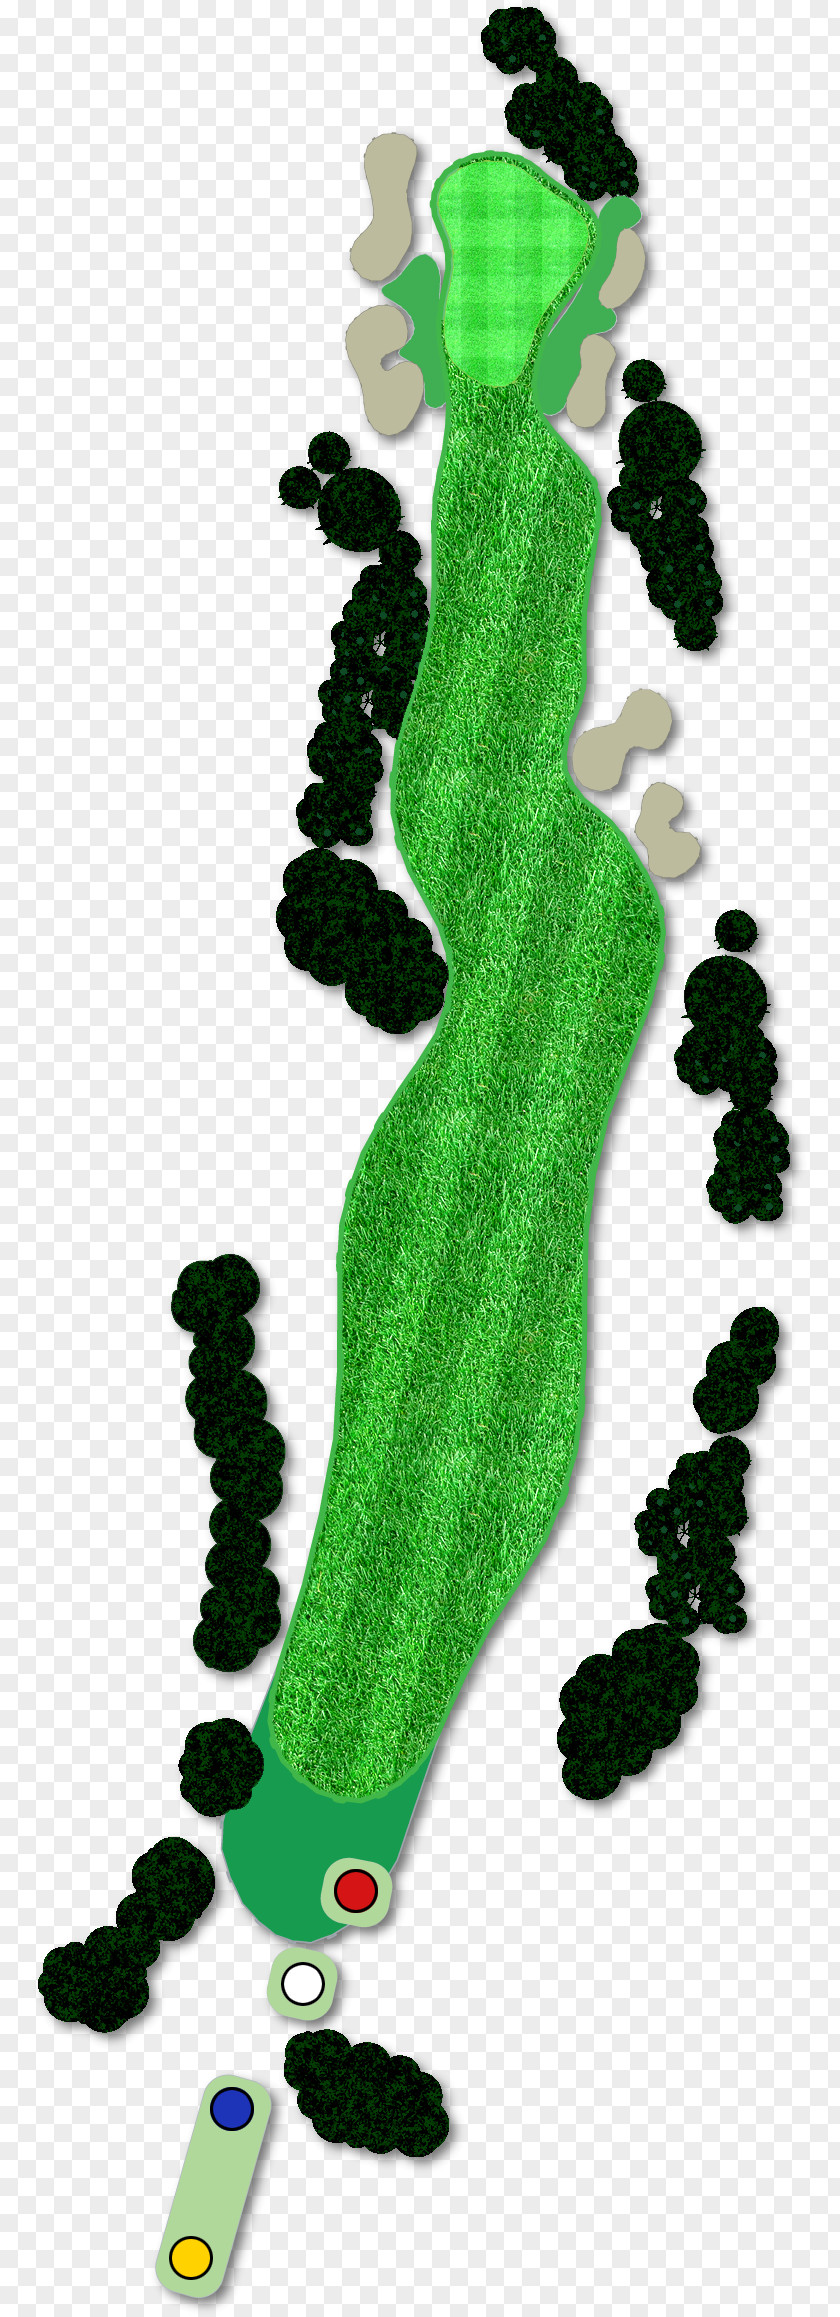 Nizels Golf Country Club Character Fiction Tree PNG